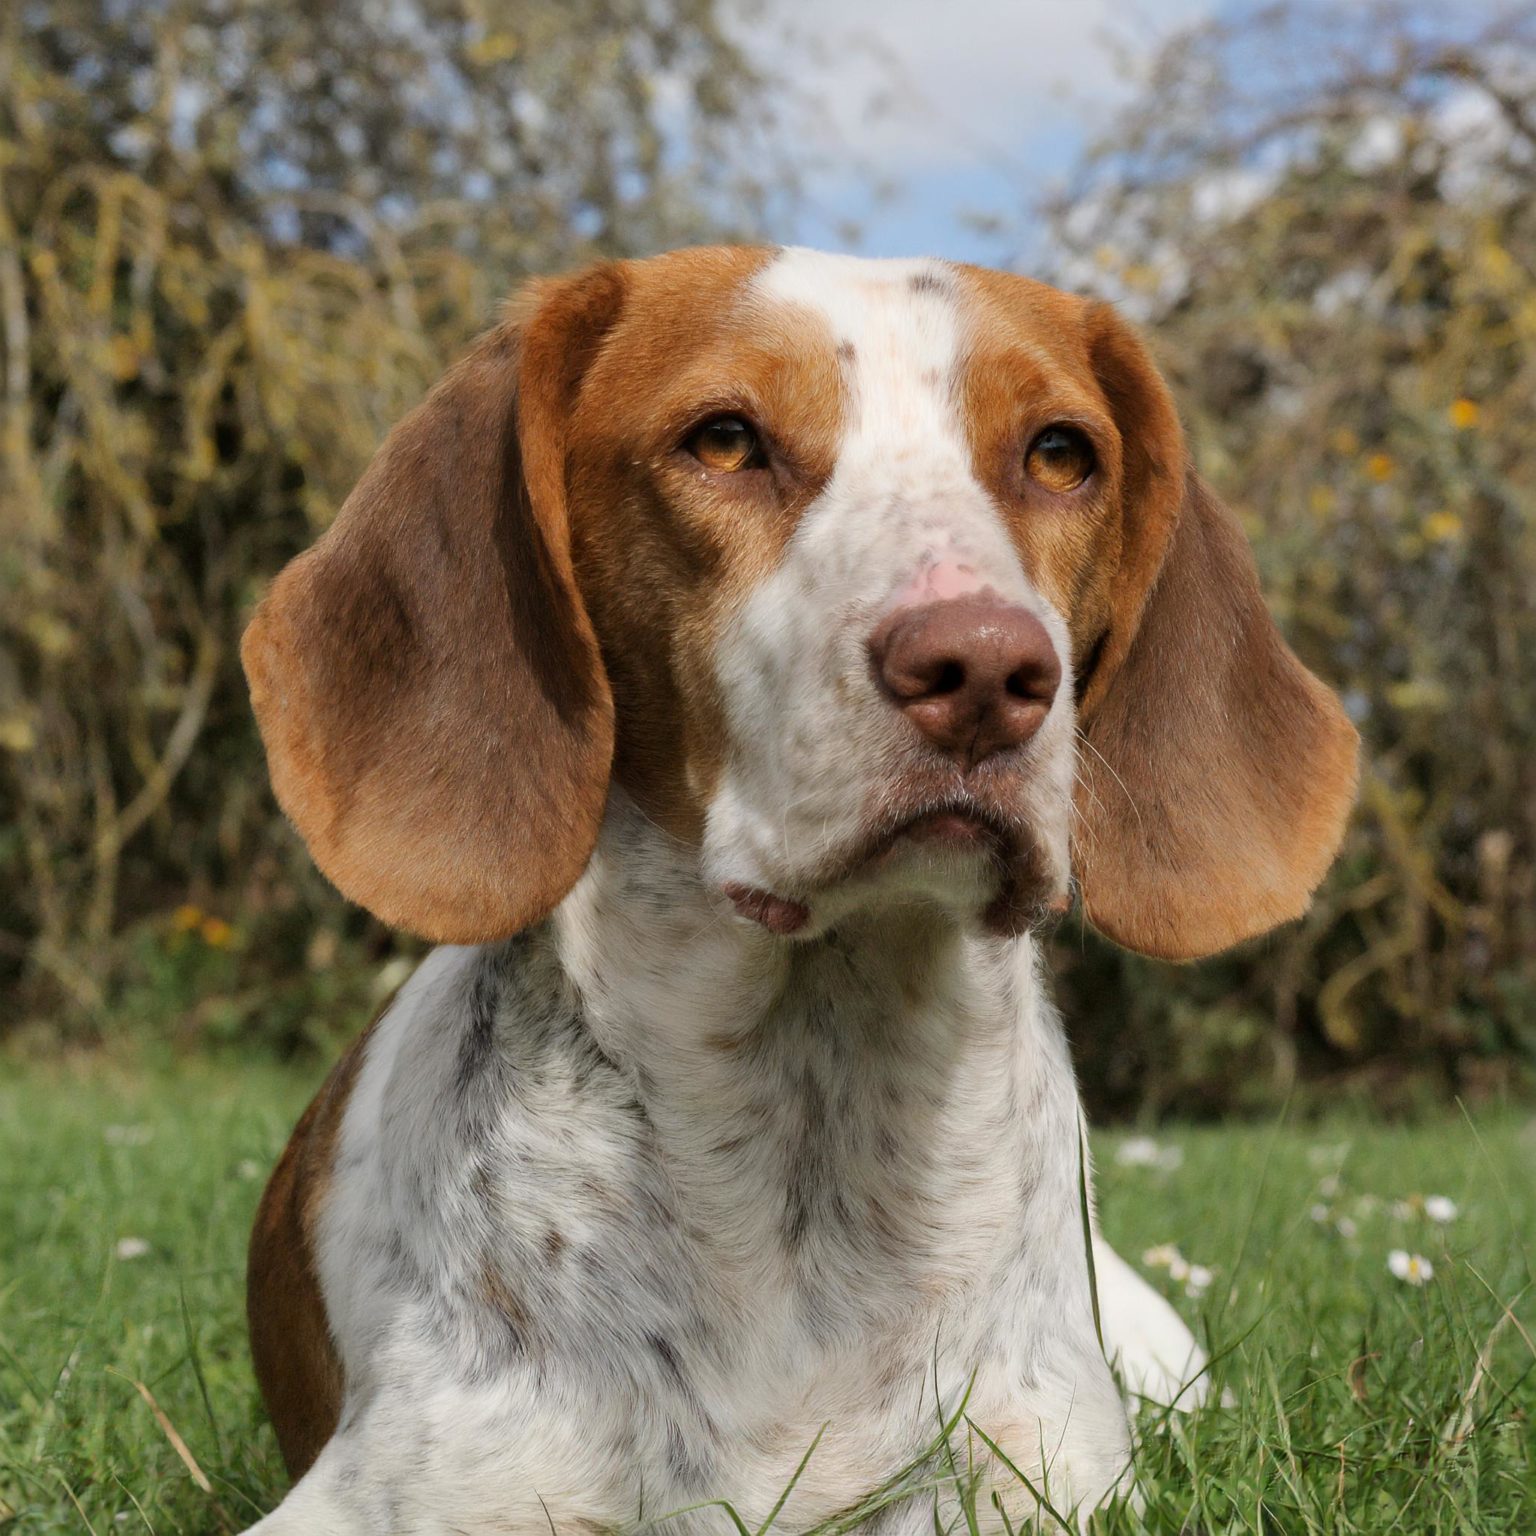 the Anglo Francais de Petite Venerie was created by crossing English hounds with the French hounds. It was used as a scenthound for hunting small game.